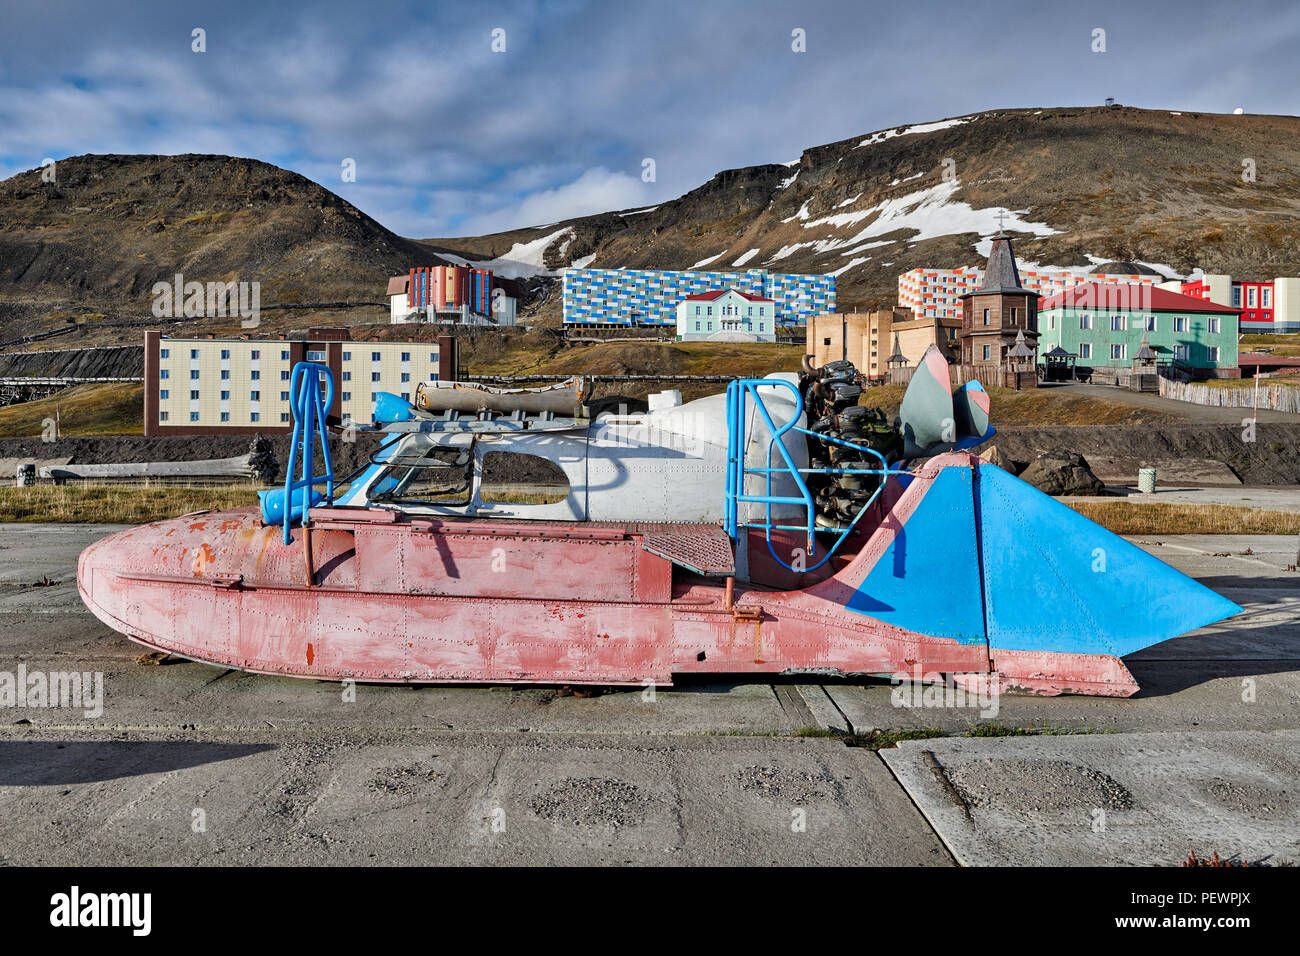 remains of strange flying boat in russian mining town Barentsburg, Svalbard or Spitsbergen, Europe Stock Photo